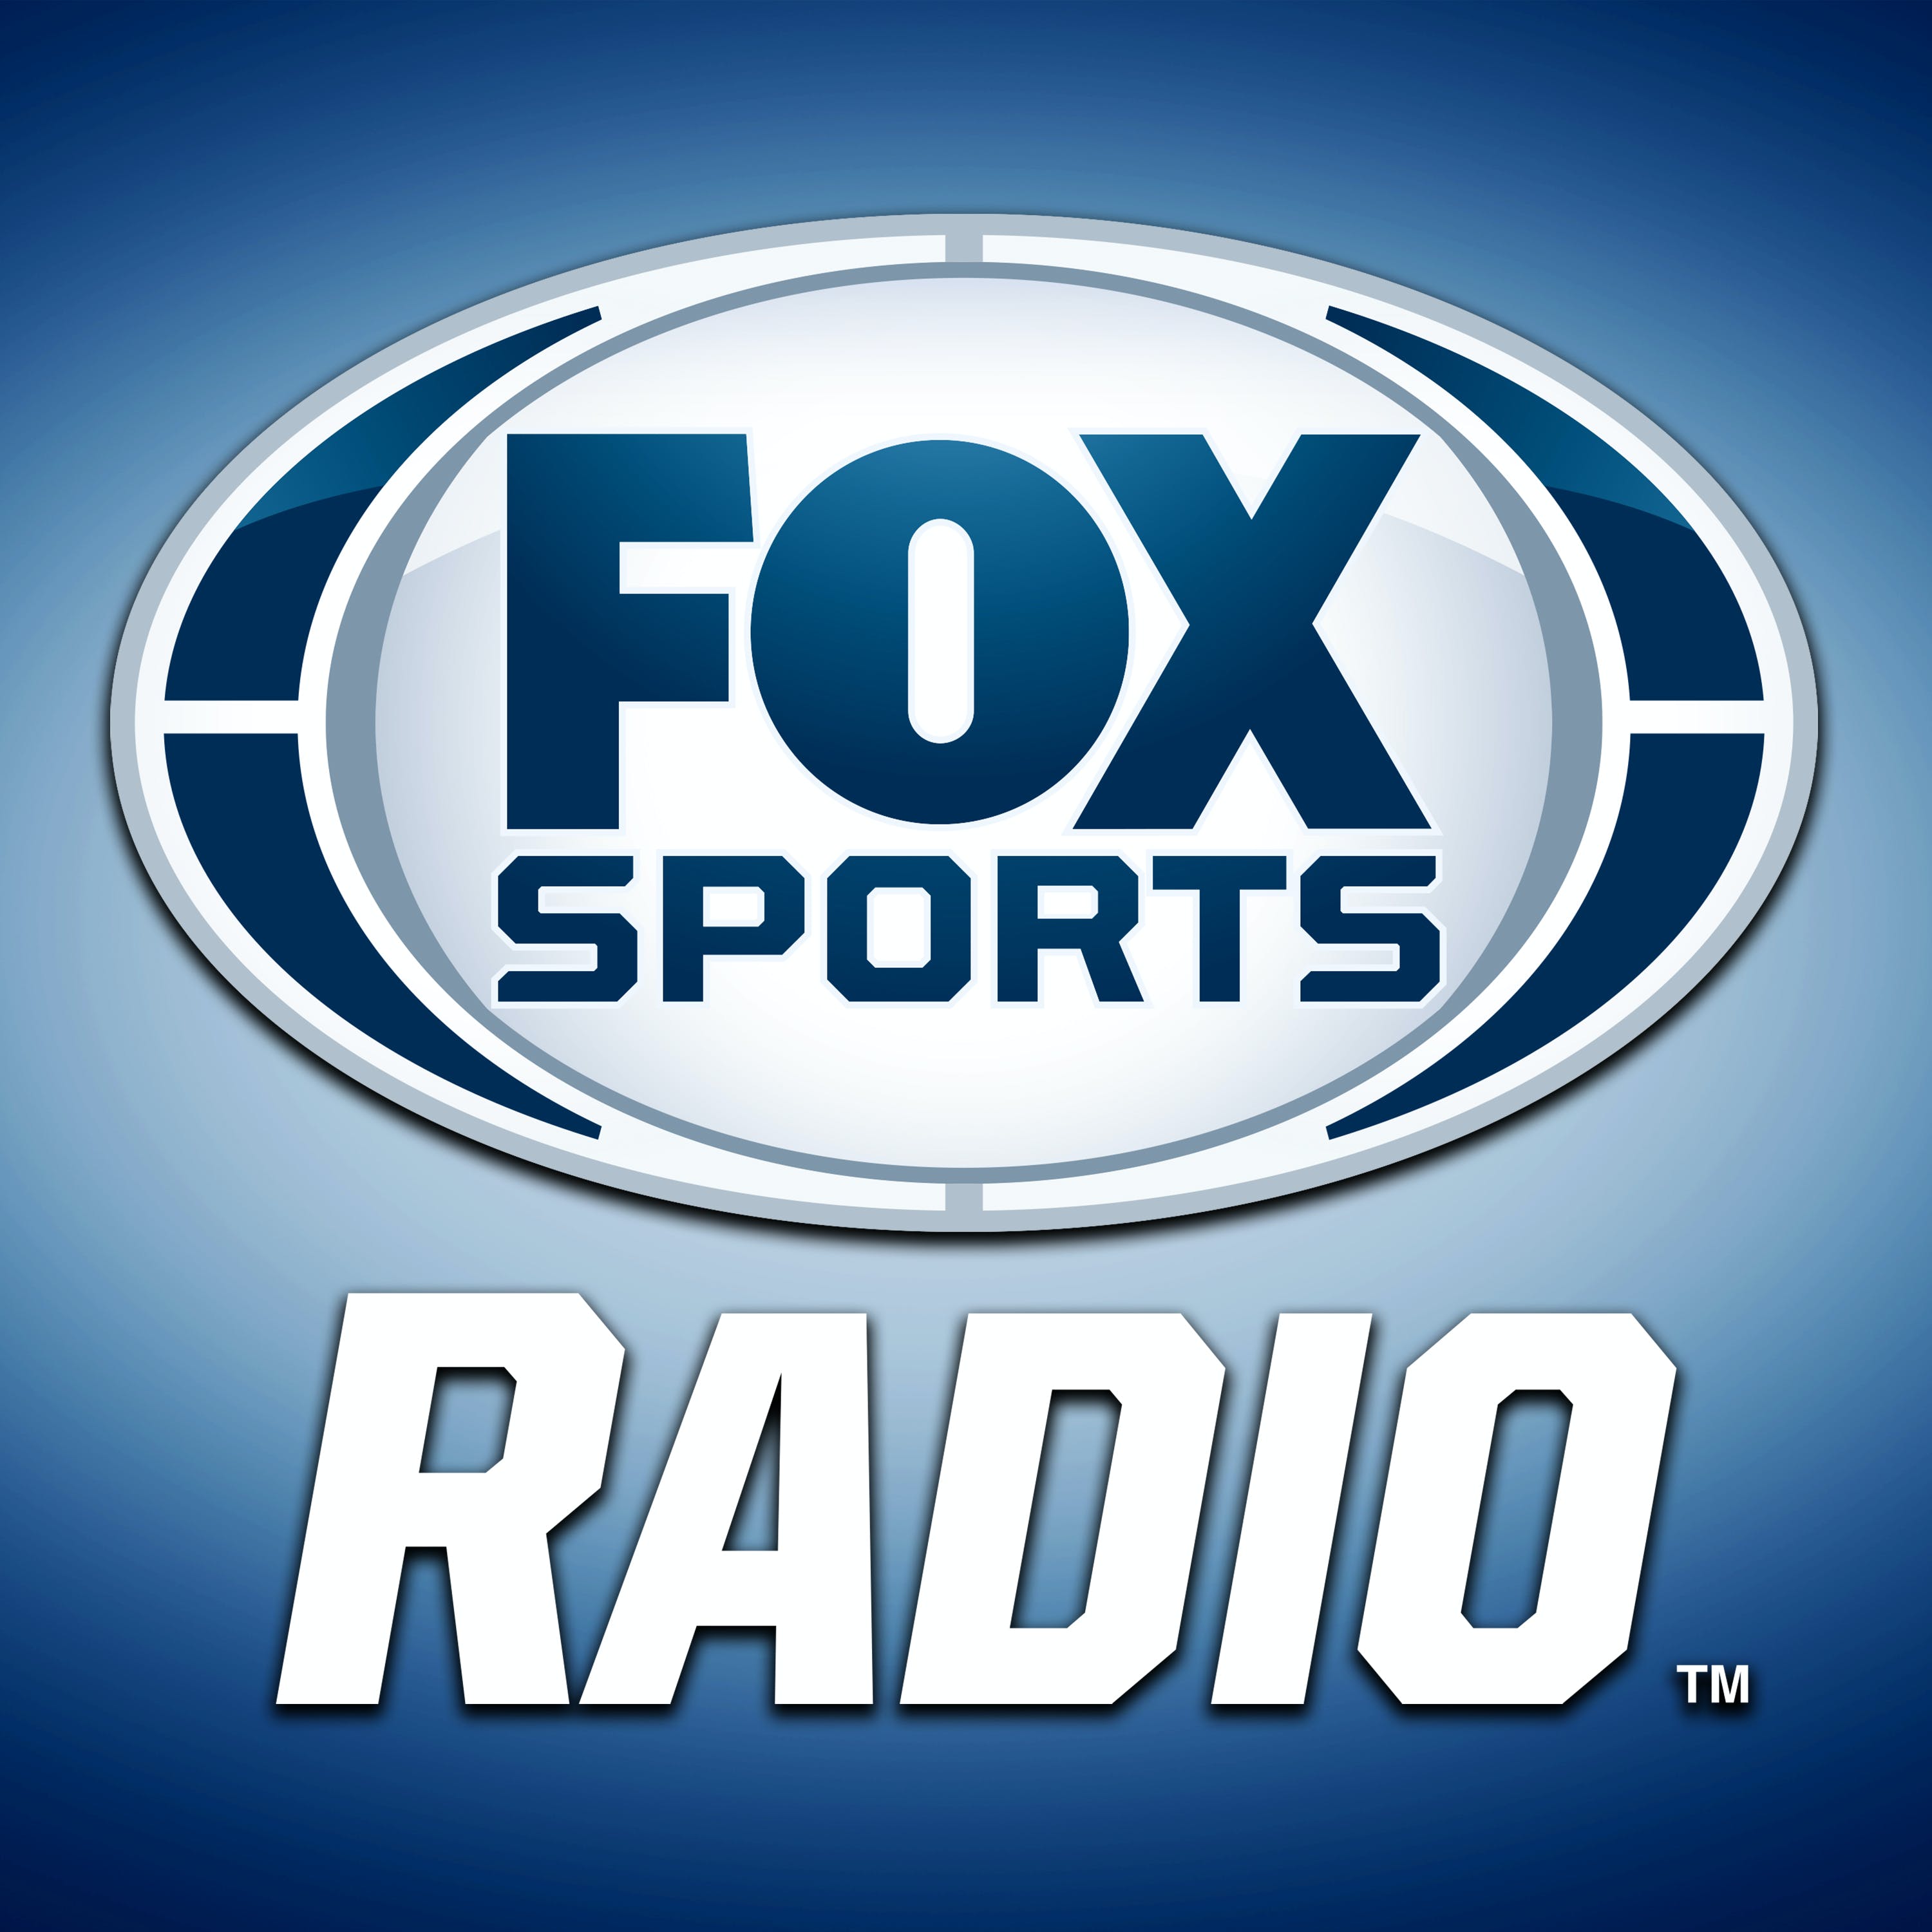 The Bernie Fratto Show Talks Russell Wilson, NFL Draft Picks, & So Much More!